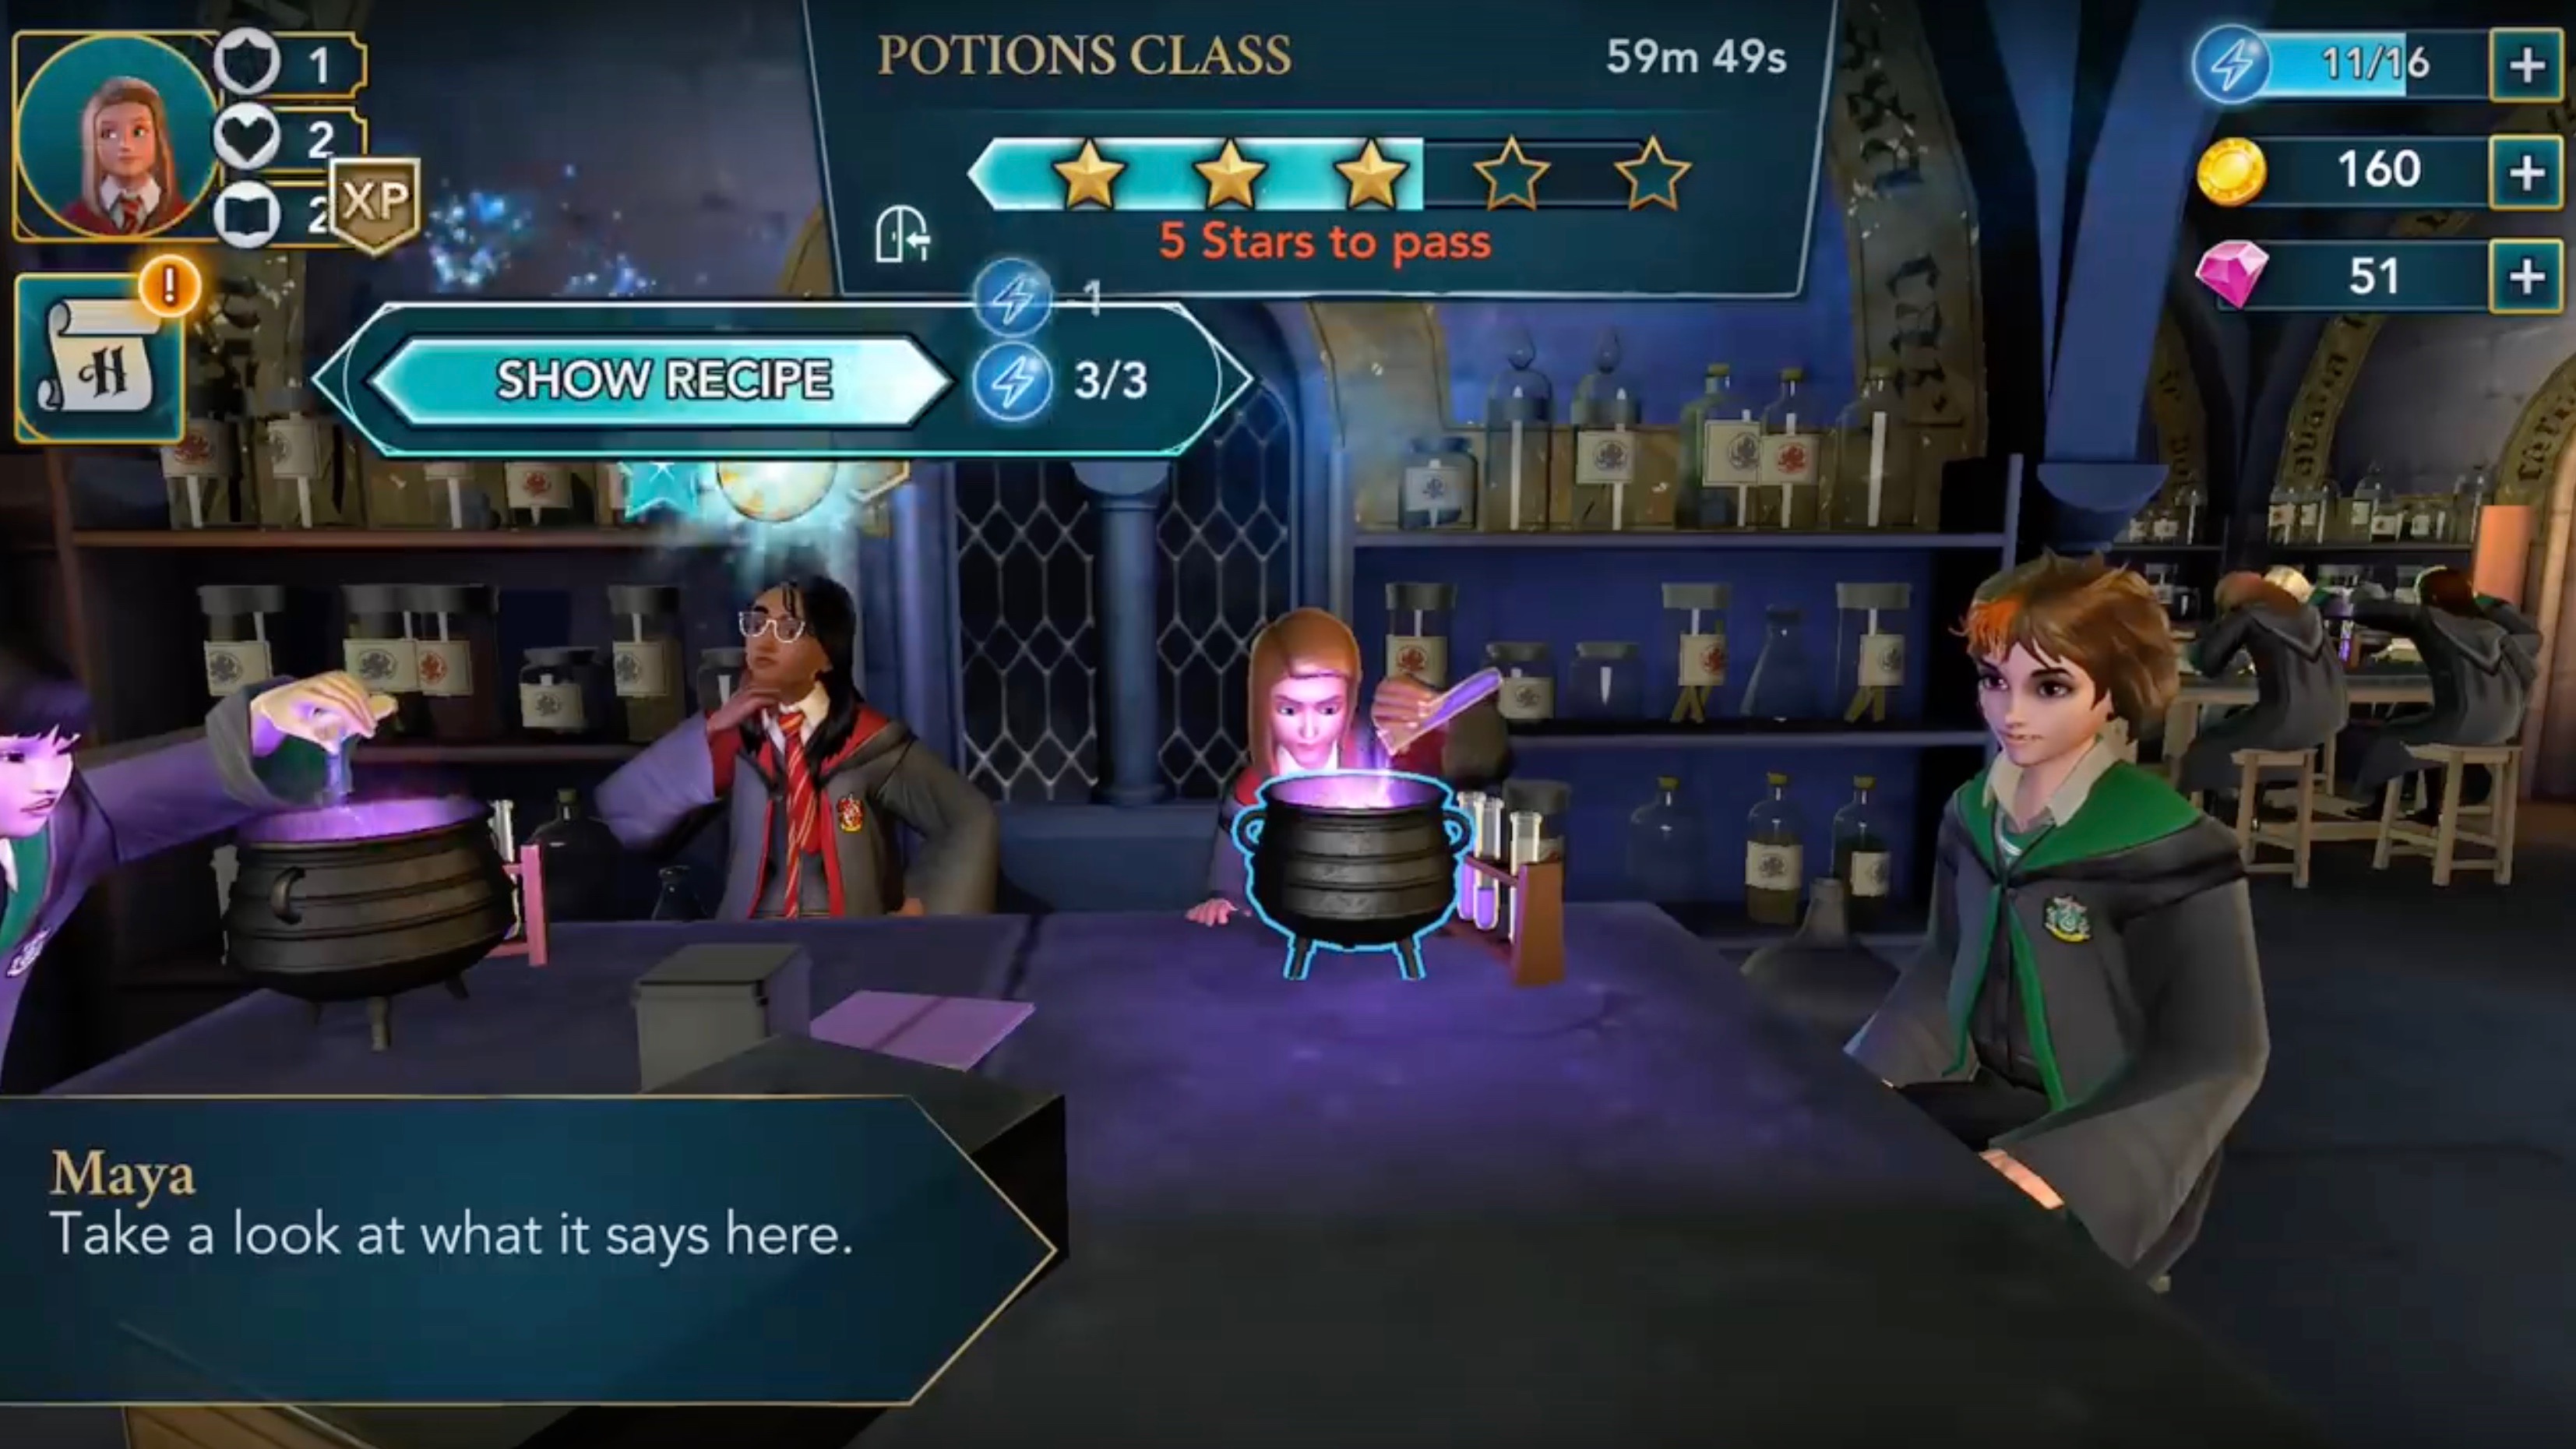 new harry potter game 2018 for mac